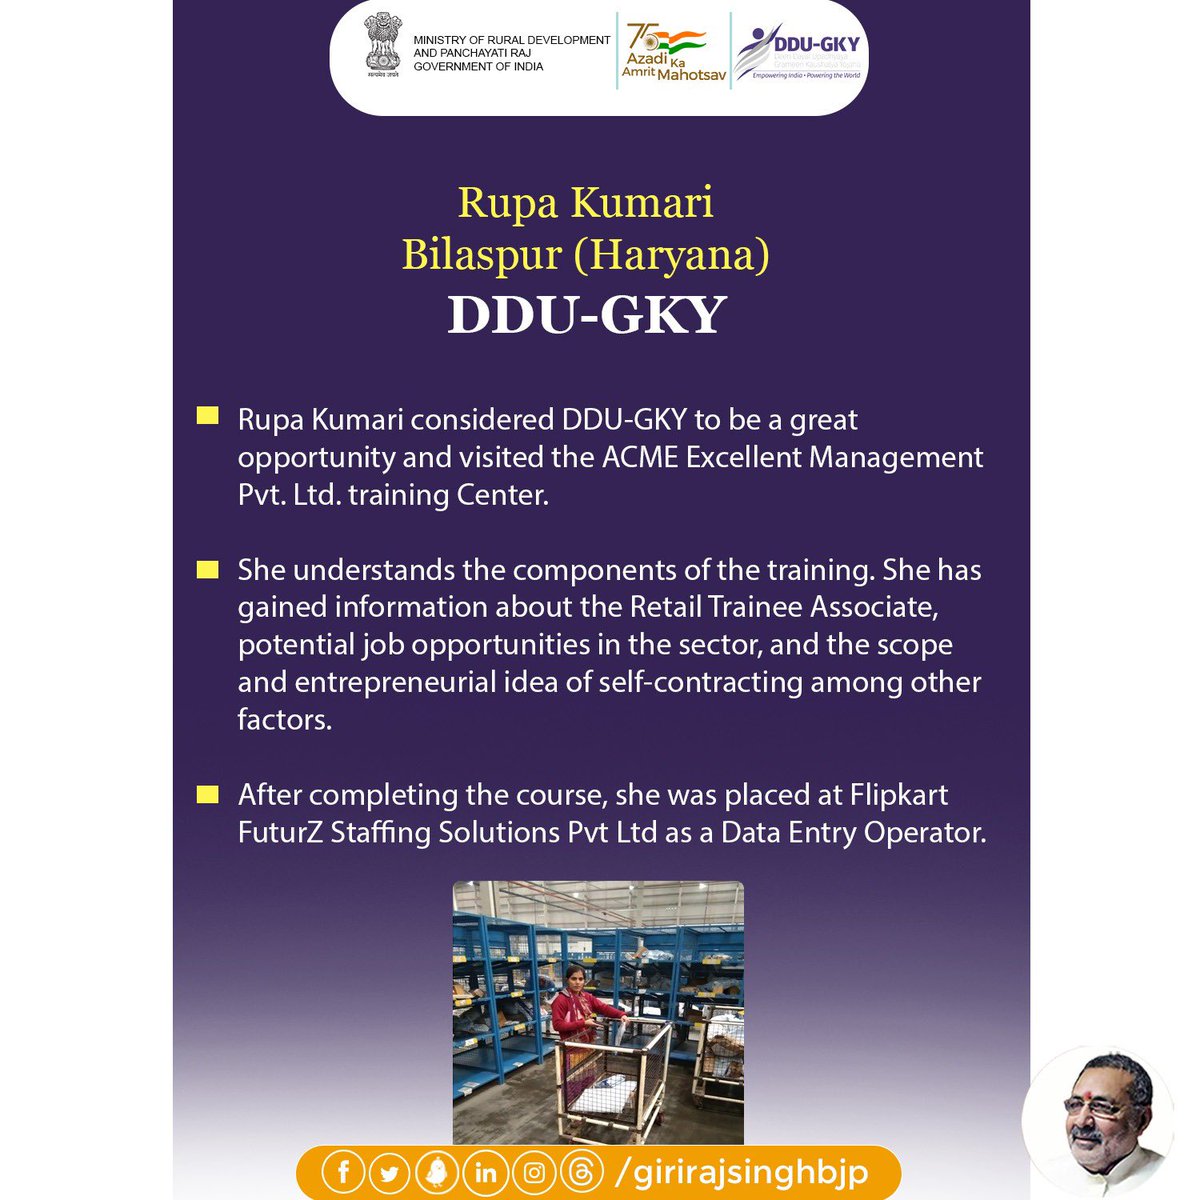 DDU-GKY's impact is undeniable—turning dreams into careers and villages into vibrant hubs of opportunity. It's a success story written by skill and determination. #DDUGKY